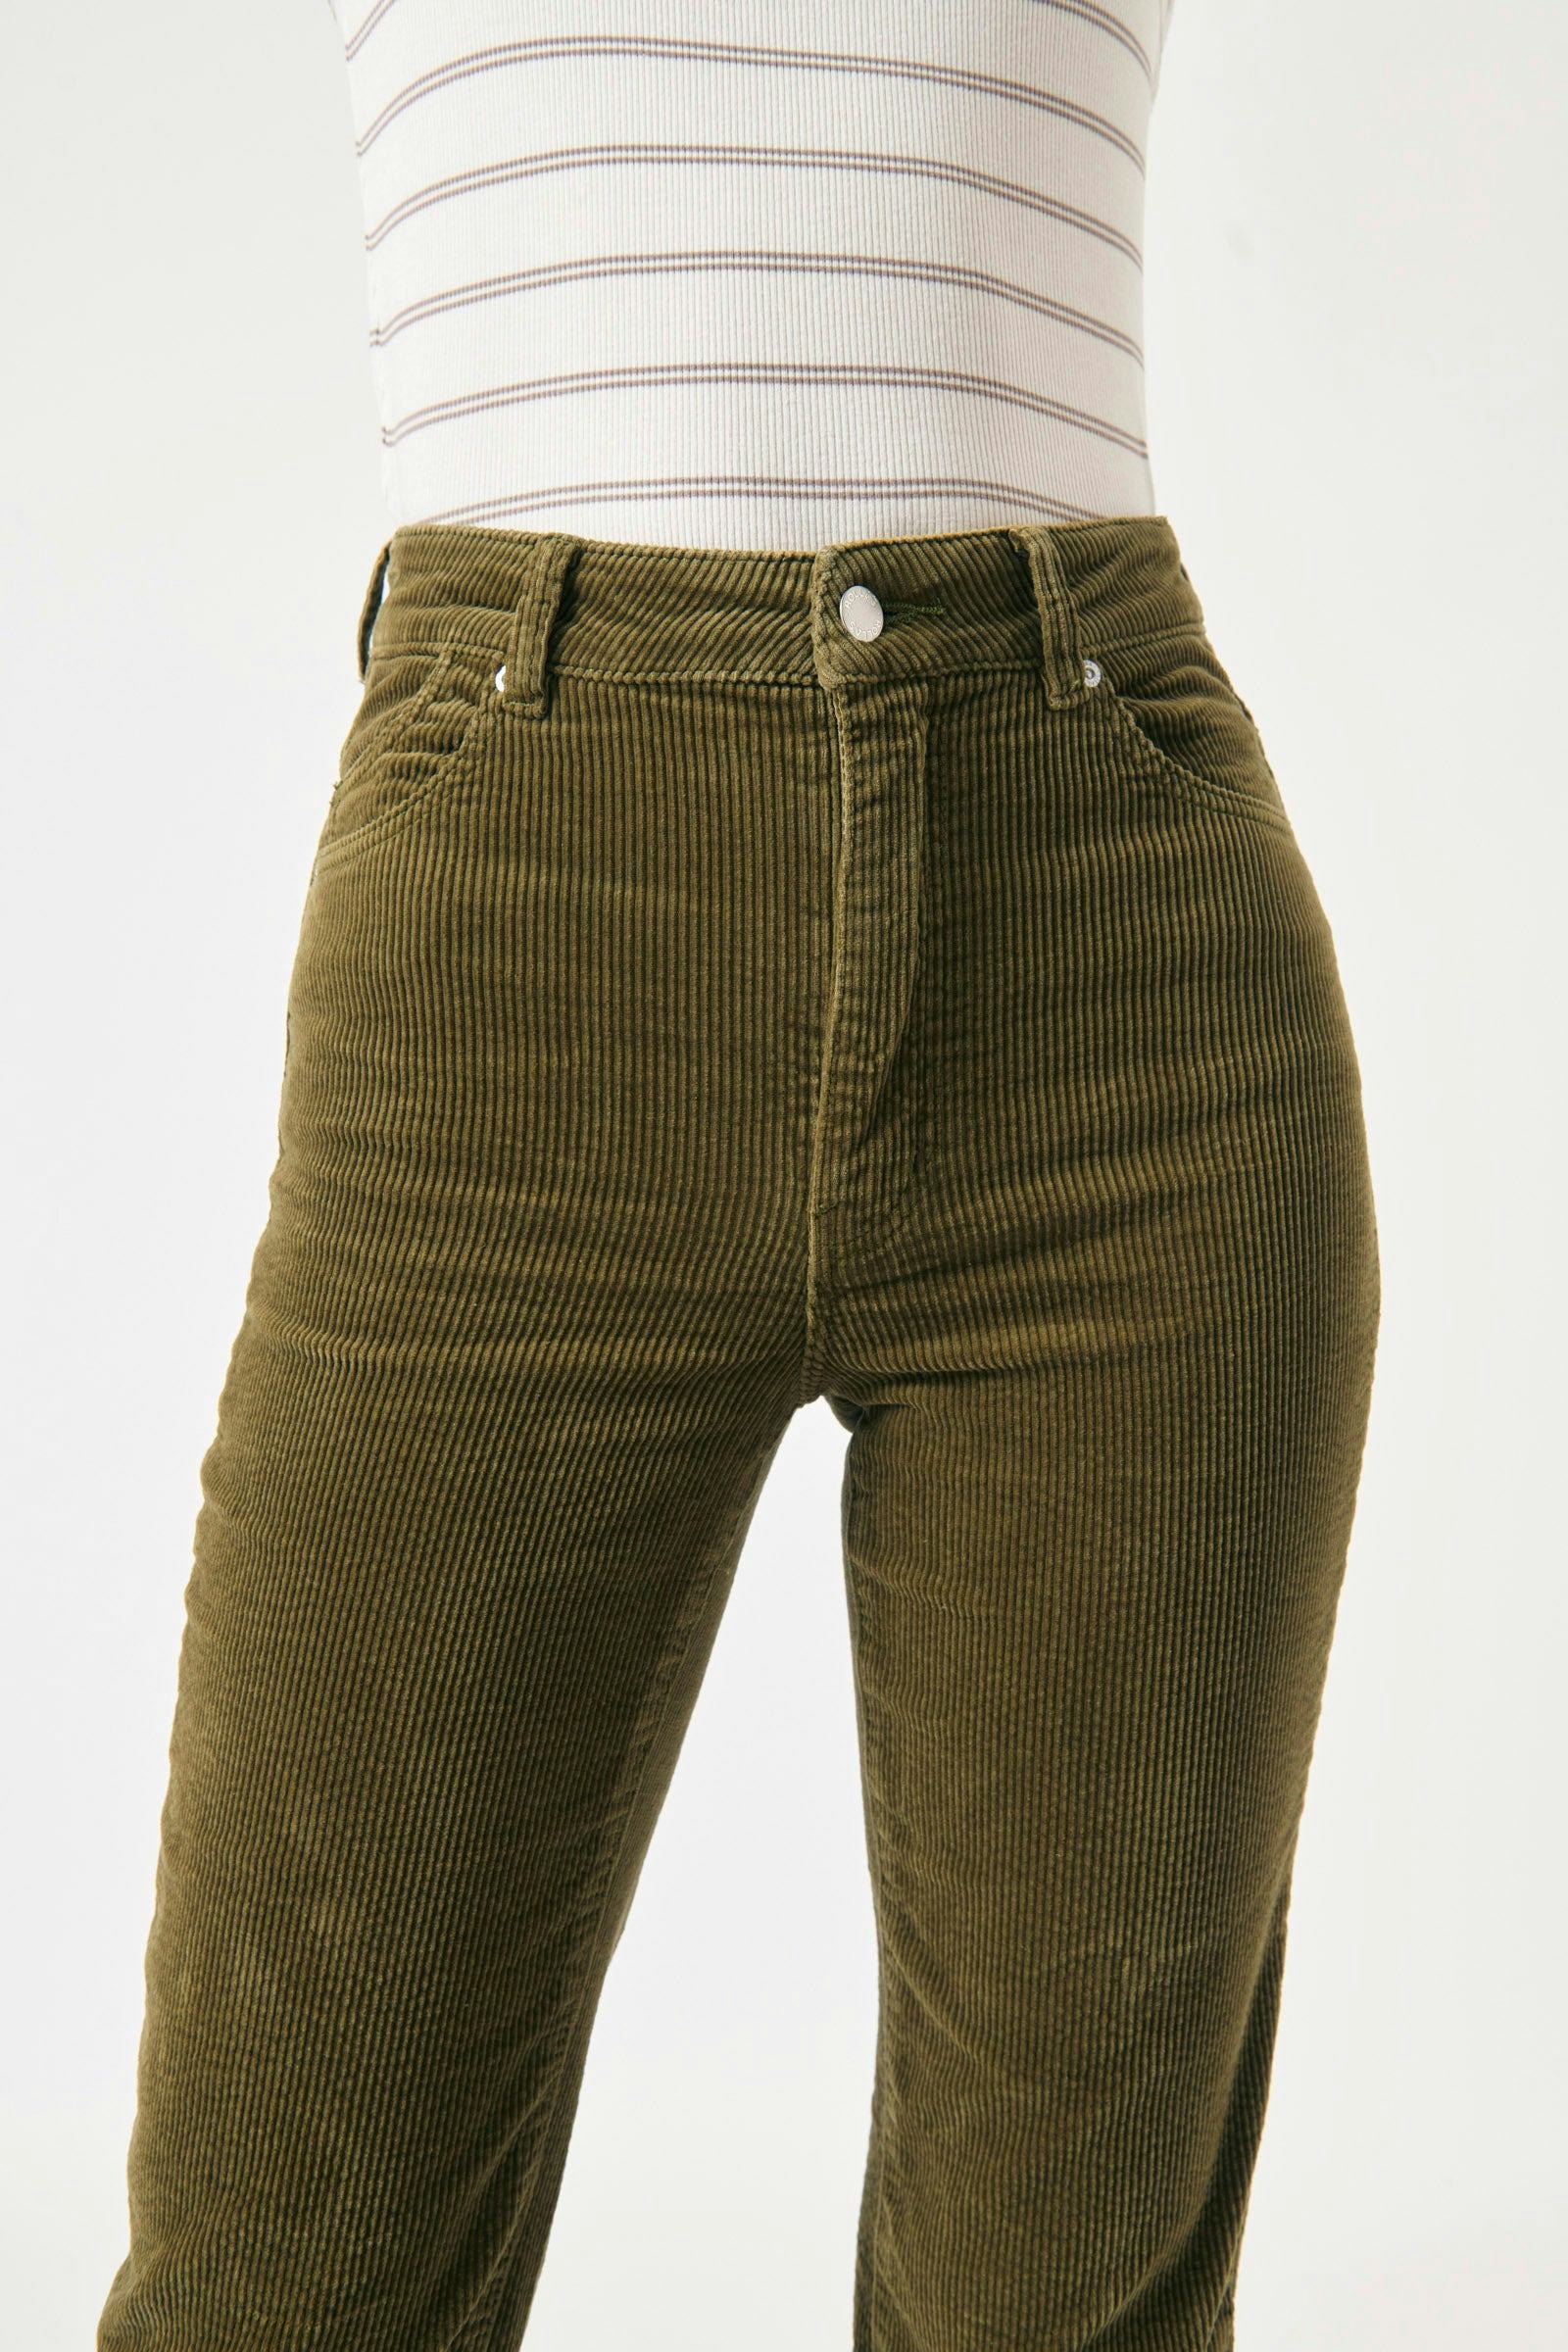 Buy Original Straight - Army Green Cord Online | Rollas Jeans